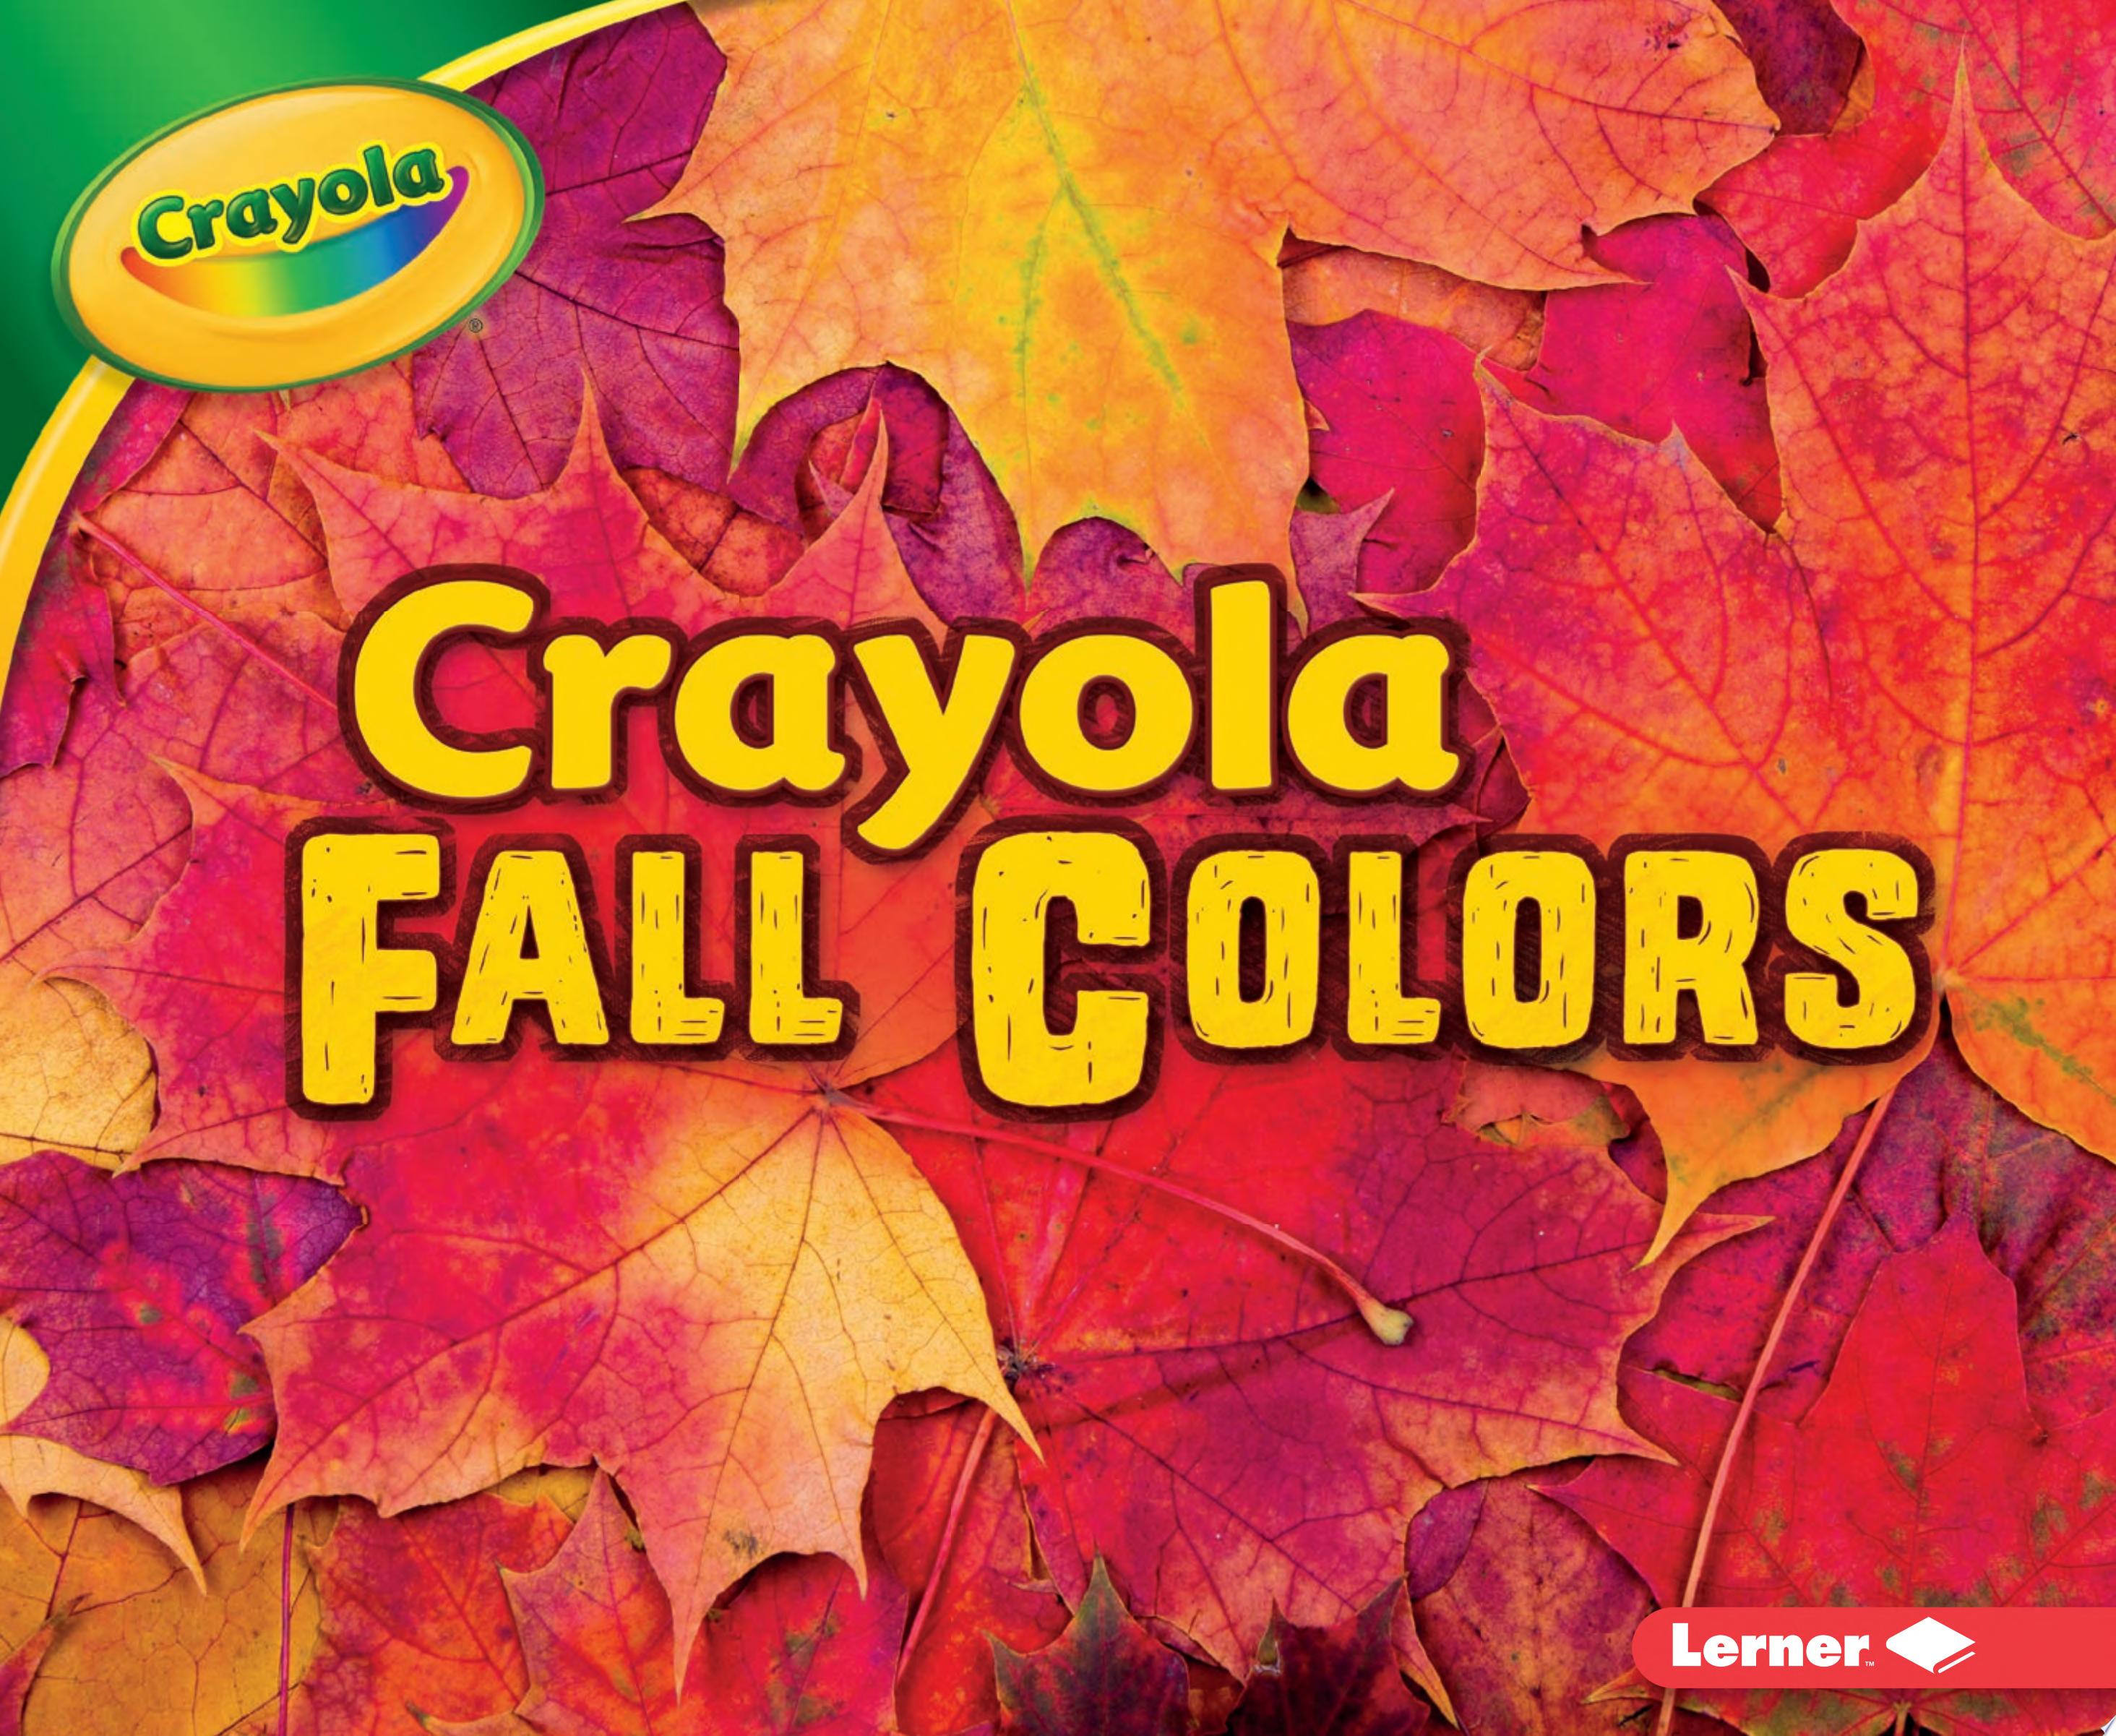 Image for "Crayola Fall Colors"